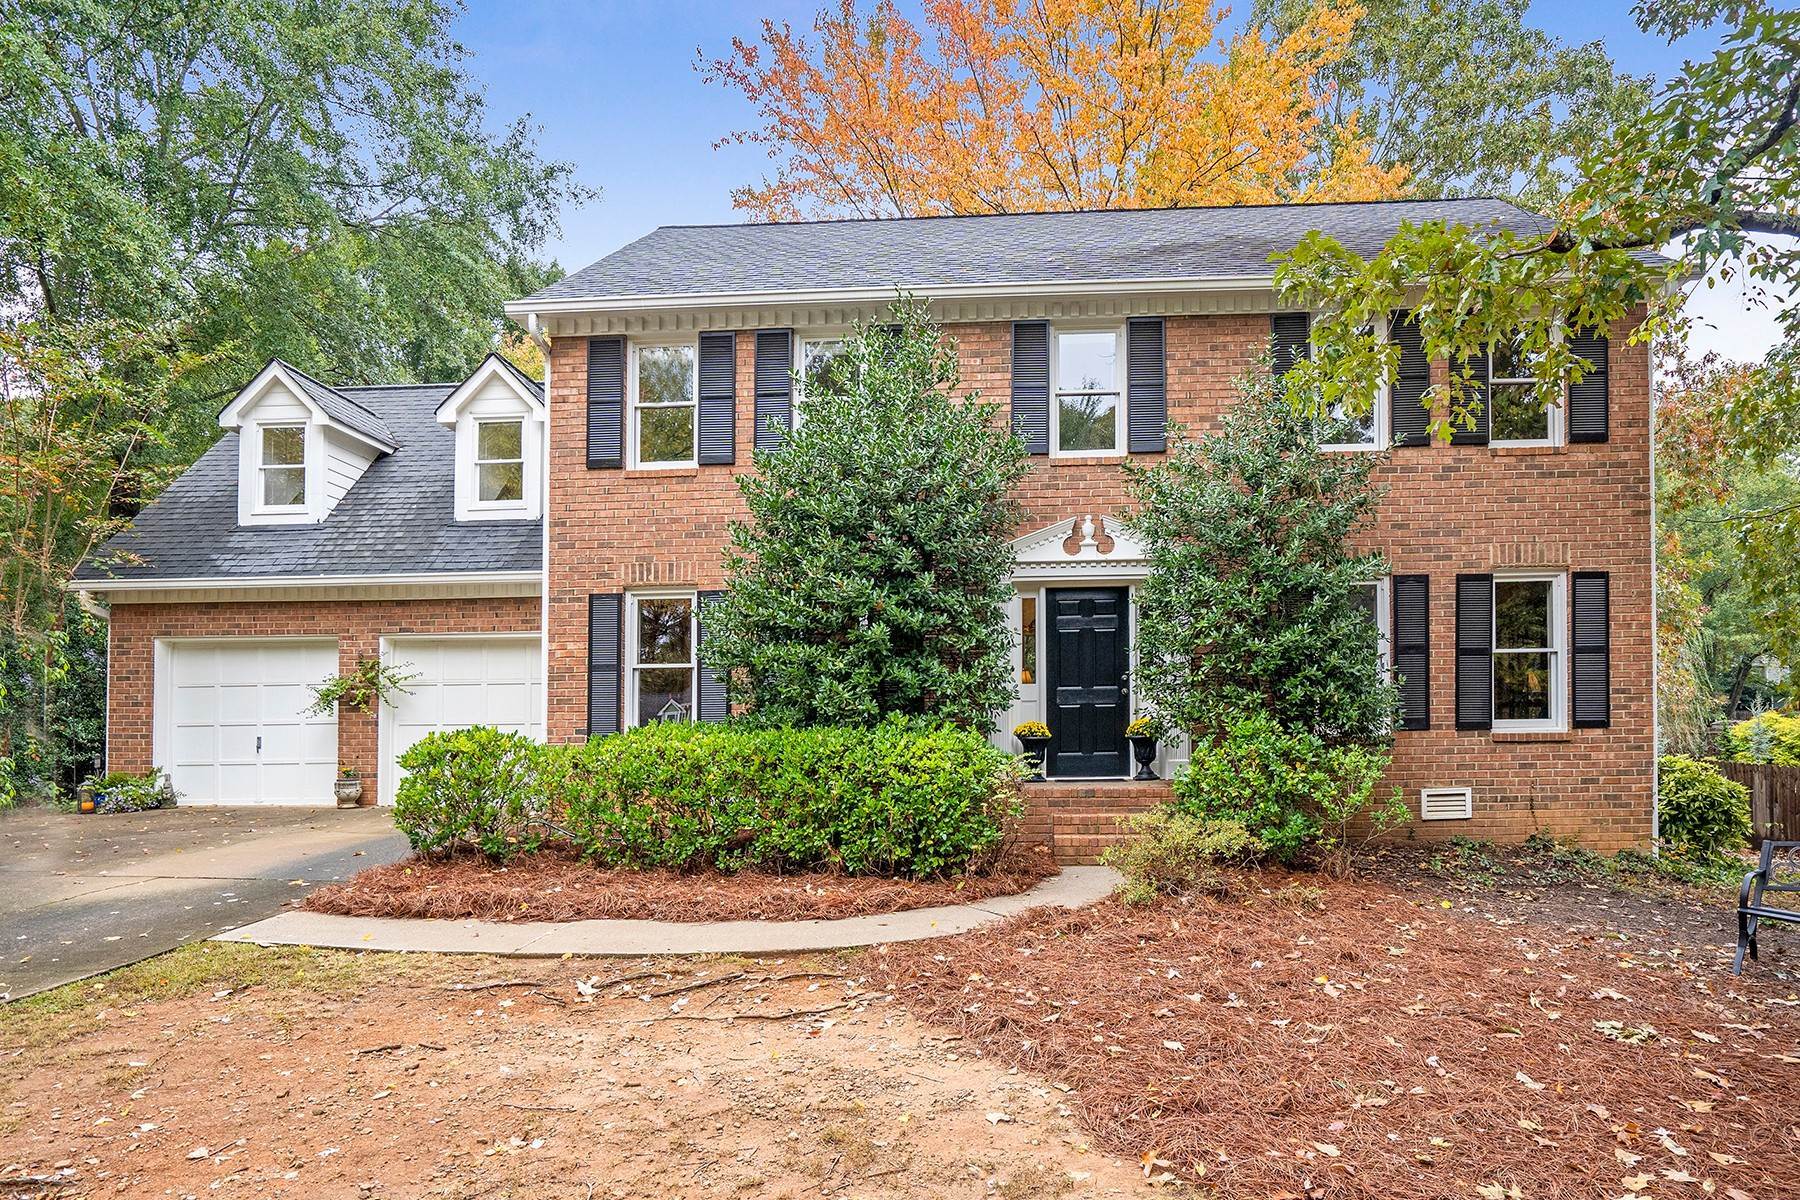 Single Family Homes for Sale at One-owner Home in Picturesque and Sought-after Andover North 4020 Dover Avenue Alpharetta, Georgia 30009 United States